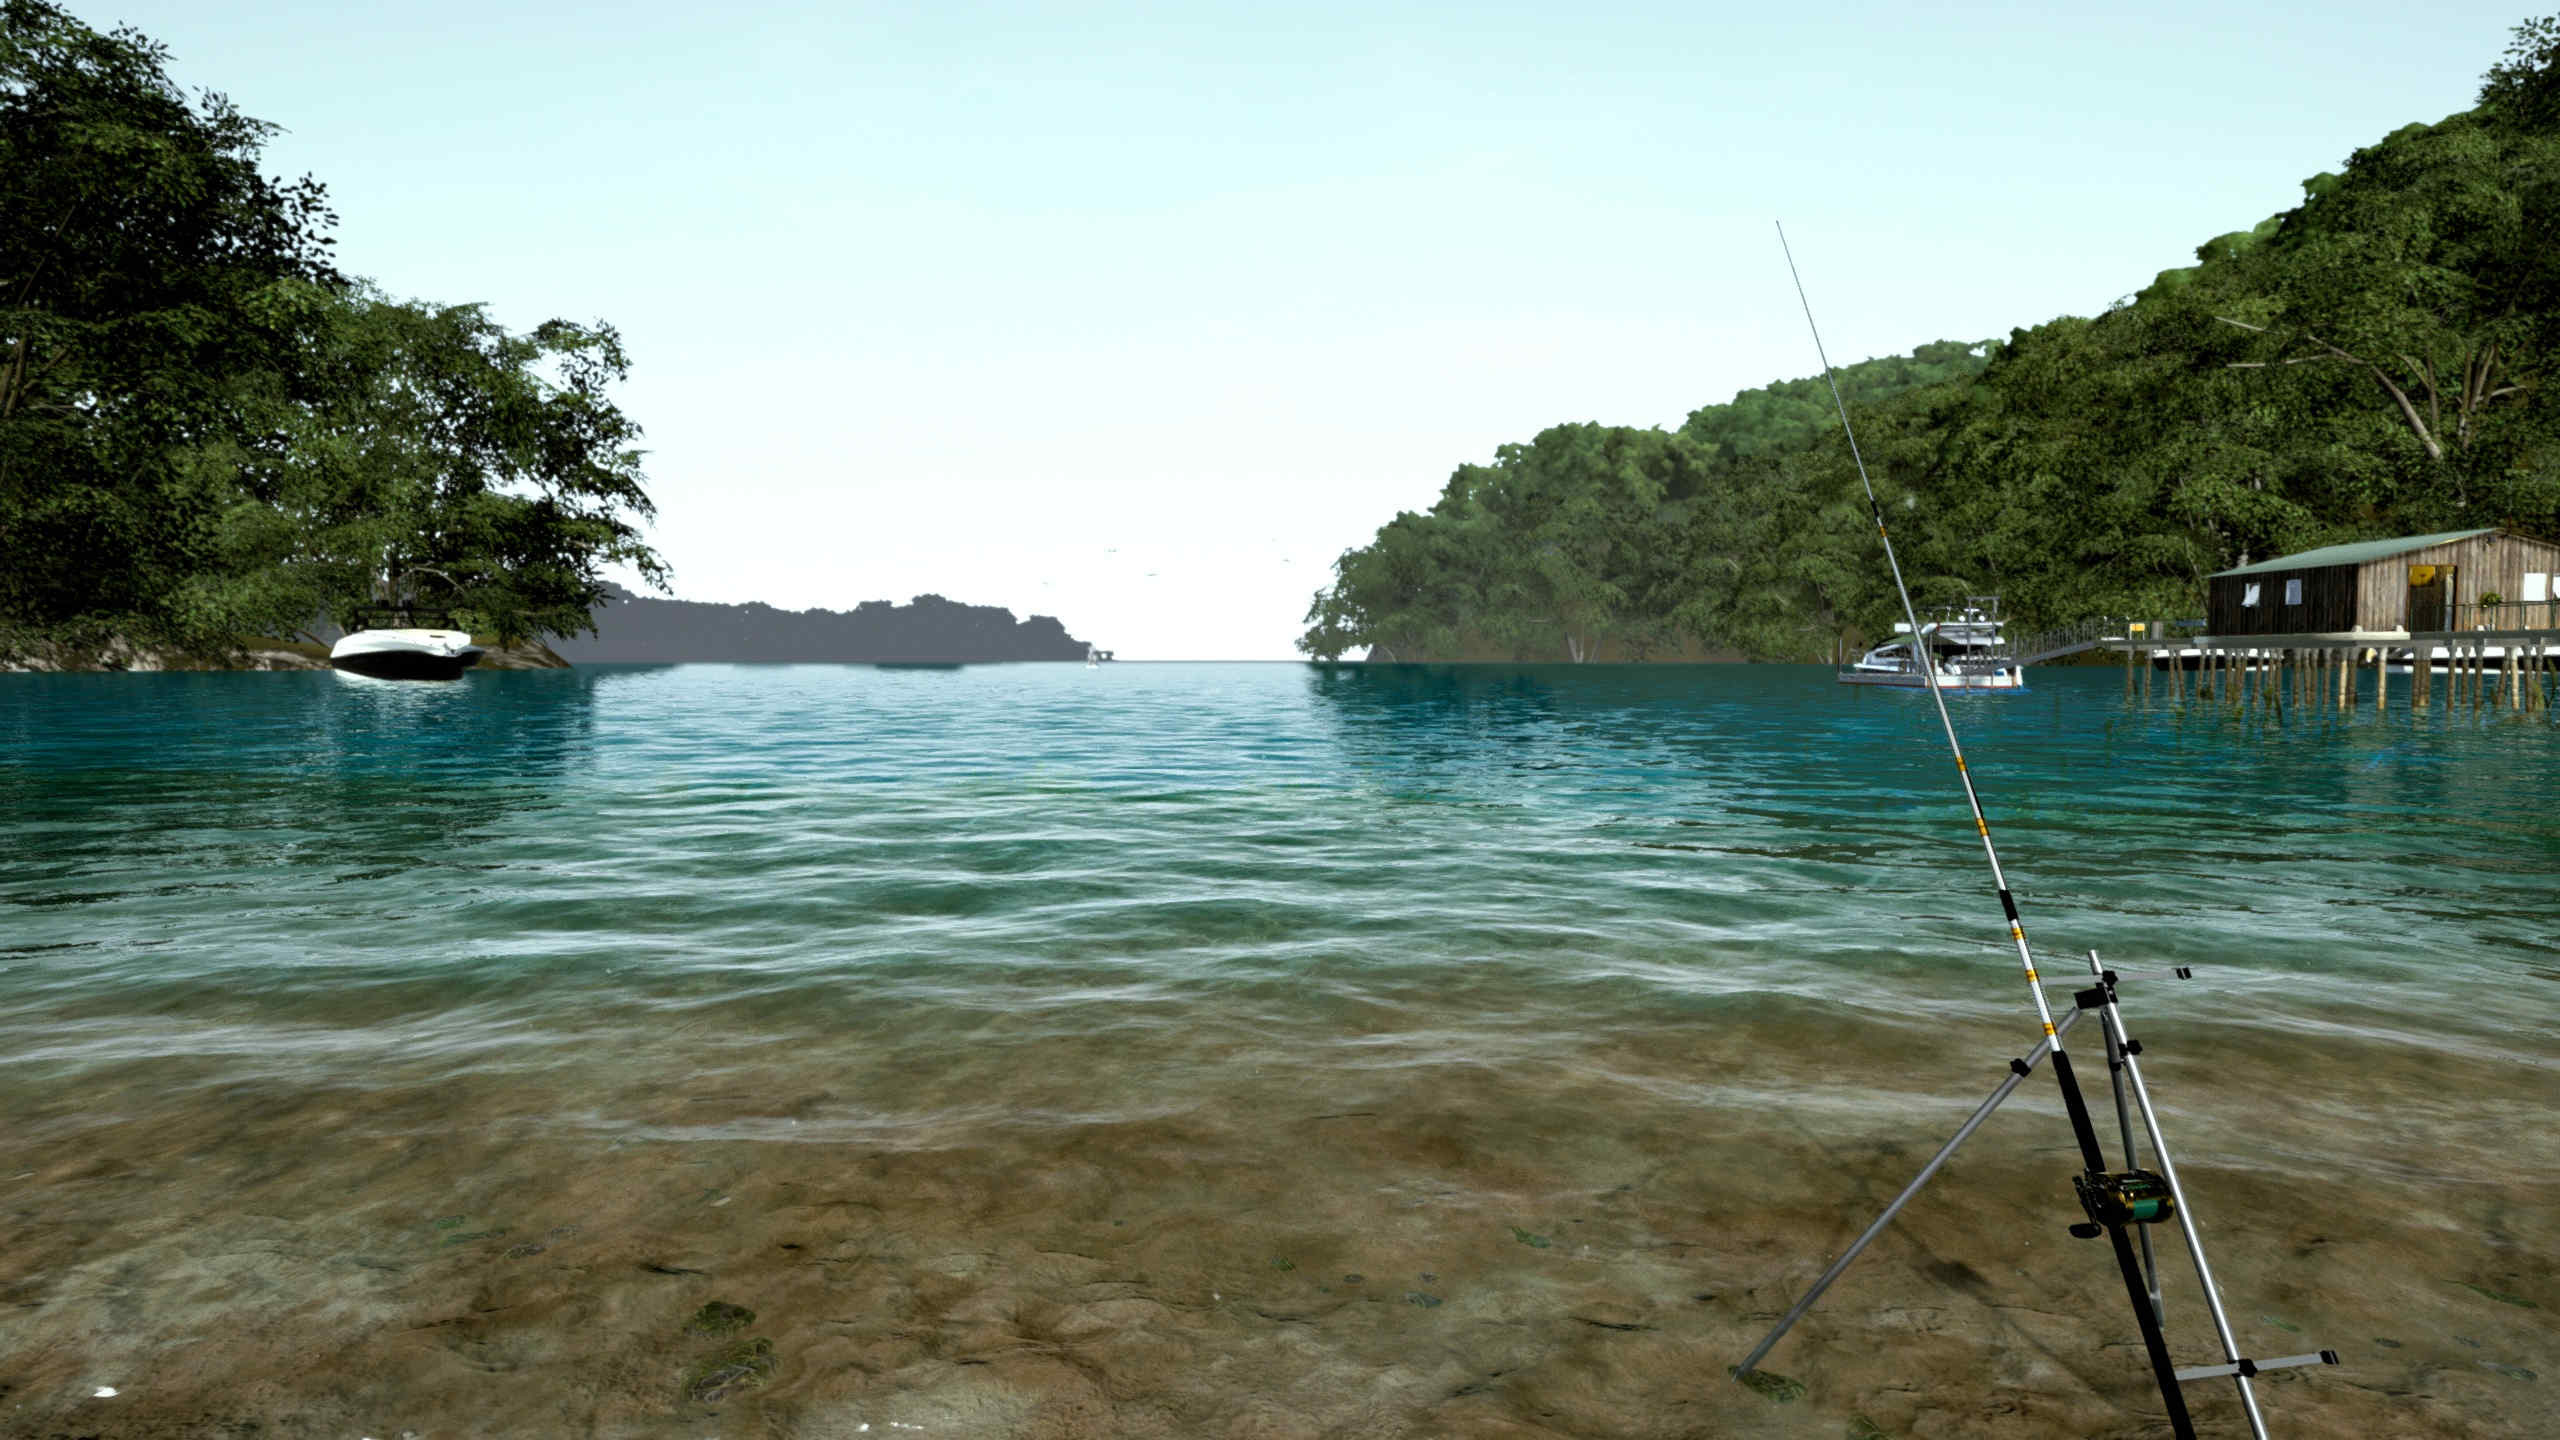 Ultimate Fishing Simulator Reels In A Release On Switch In Q1 2019